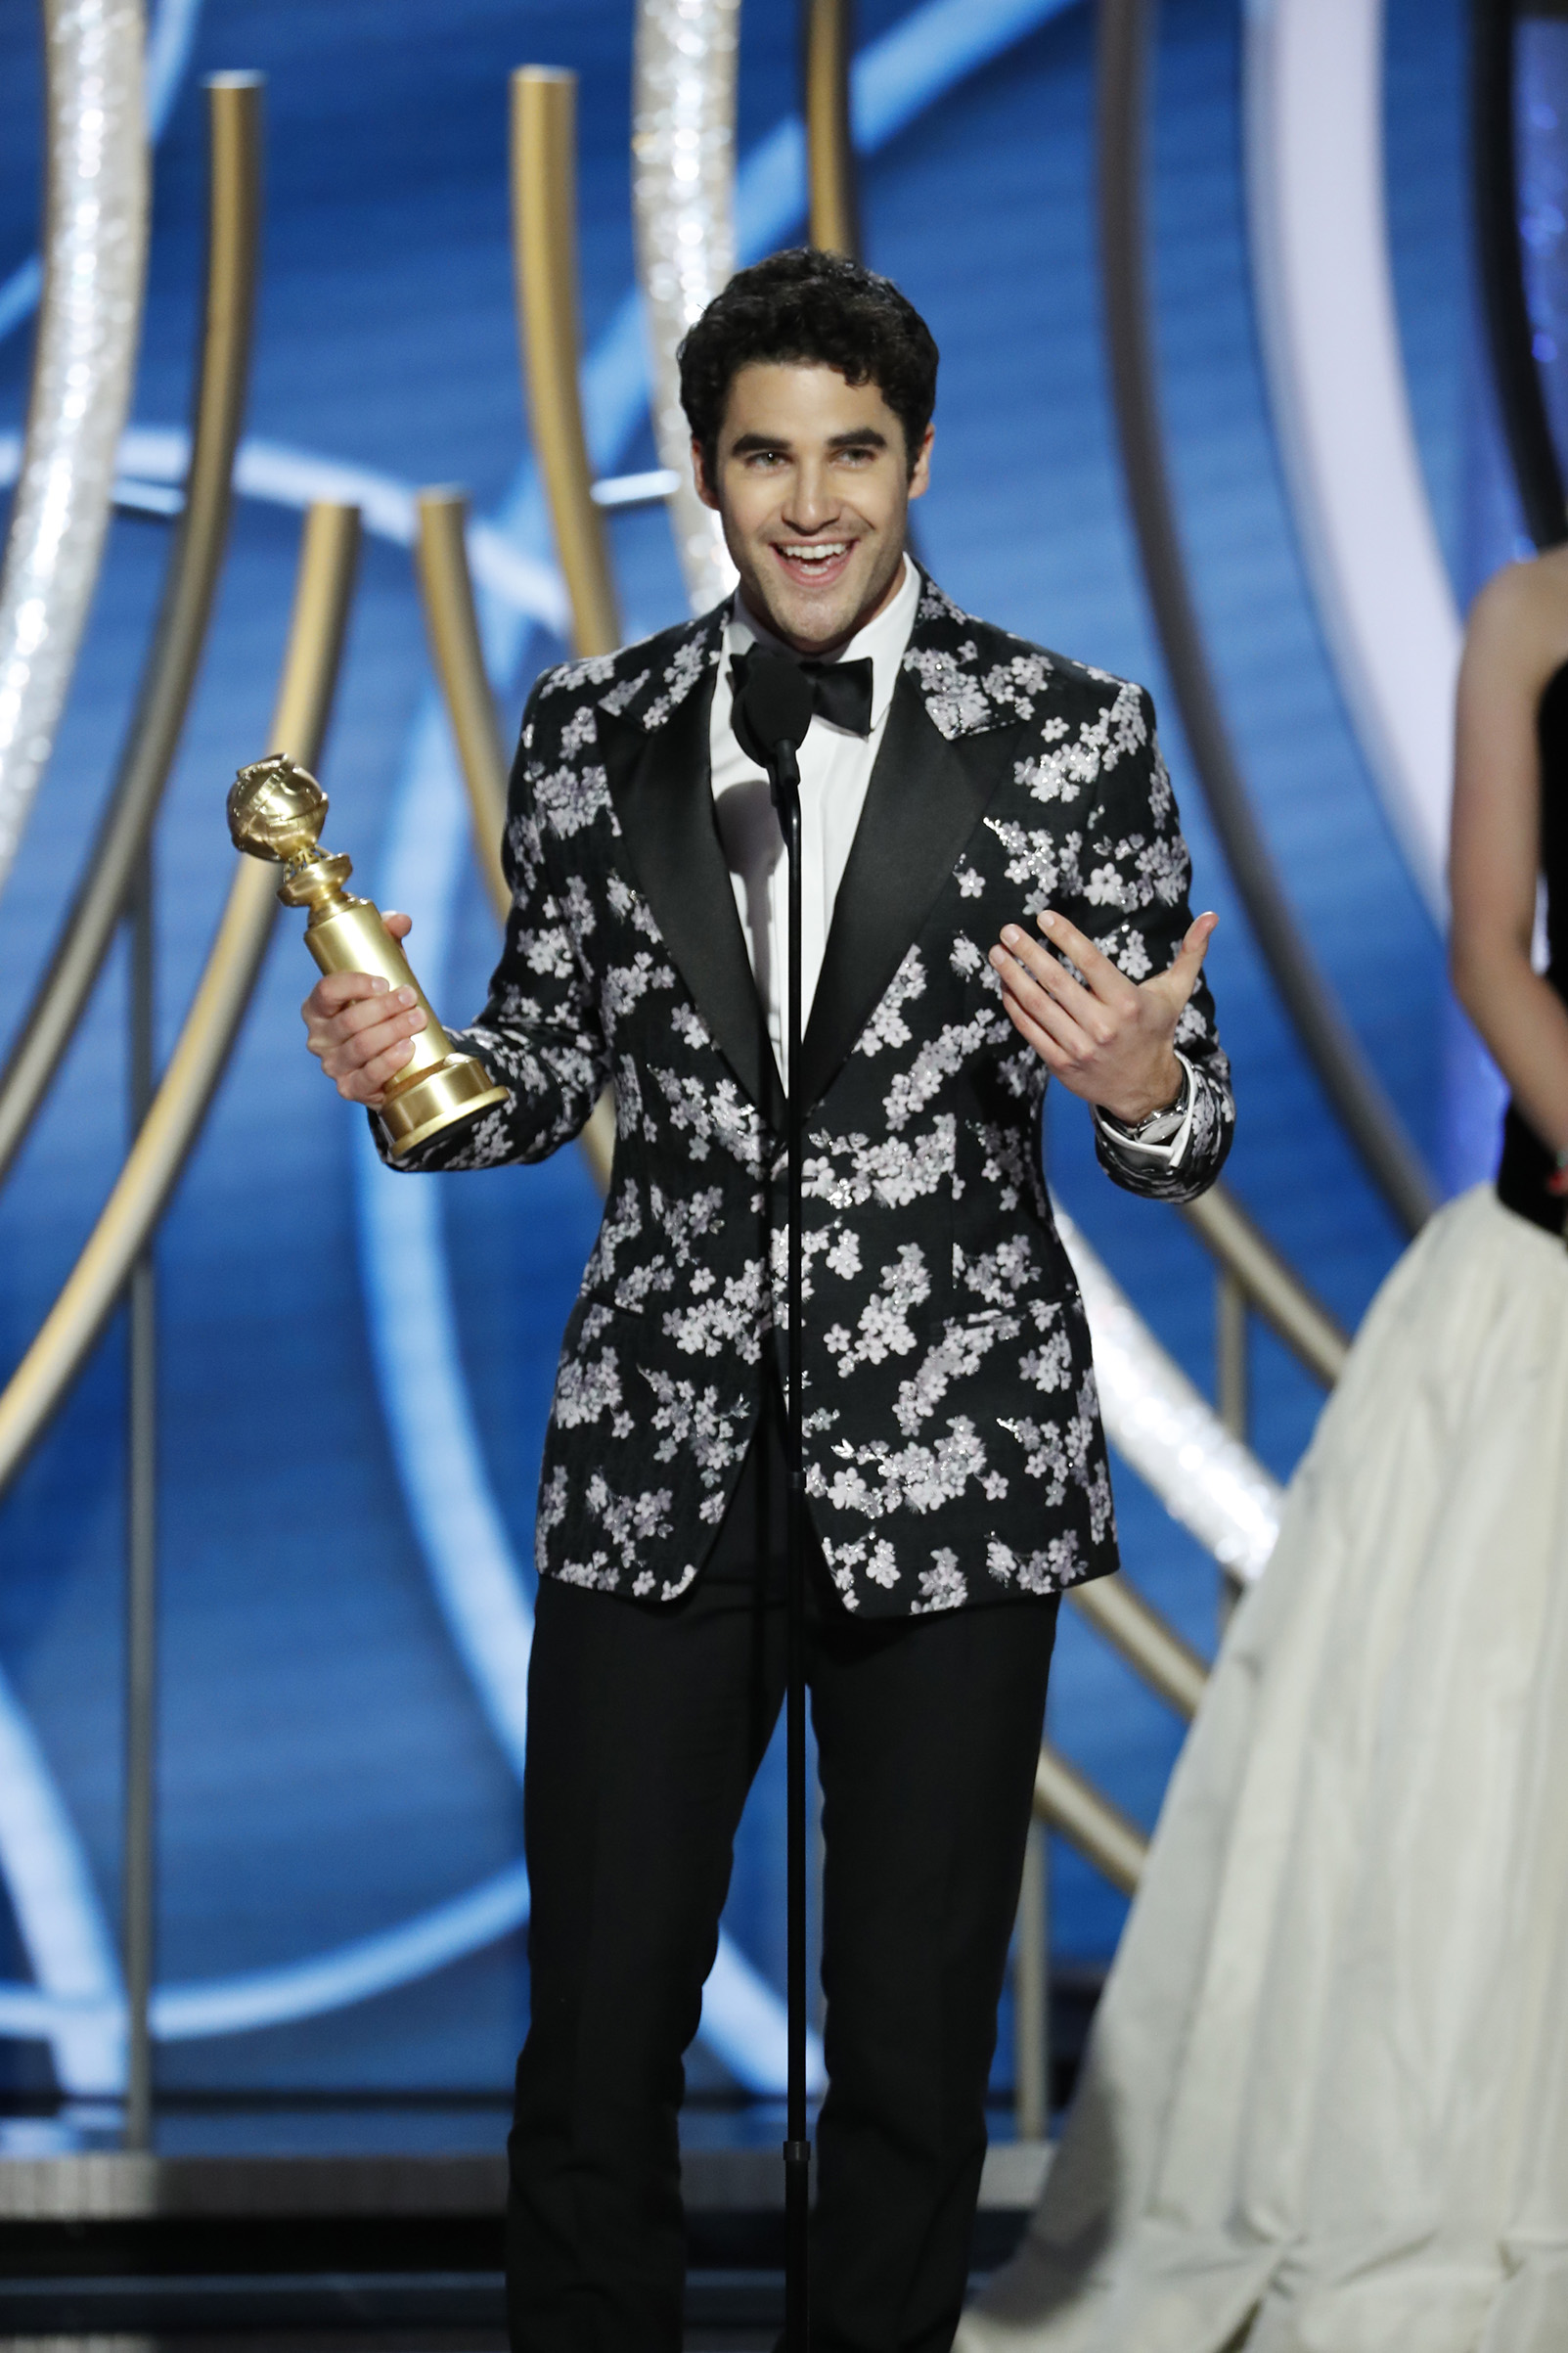 Darren Criss from “The Assassination of Gianni Versace: American Crime Story” accepts the Best Performance by an Actor in a Limited Series or Motion Picture Made for Television award onstage during the 76th Annual Golden Globe Awards. (NBCUniversal/Getty Images)